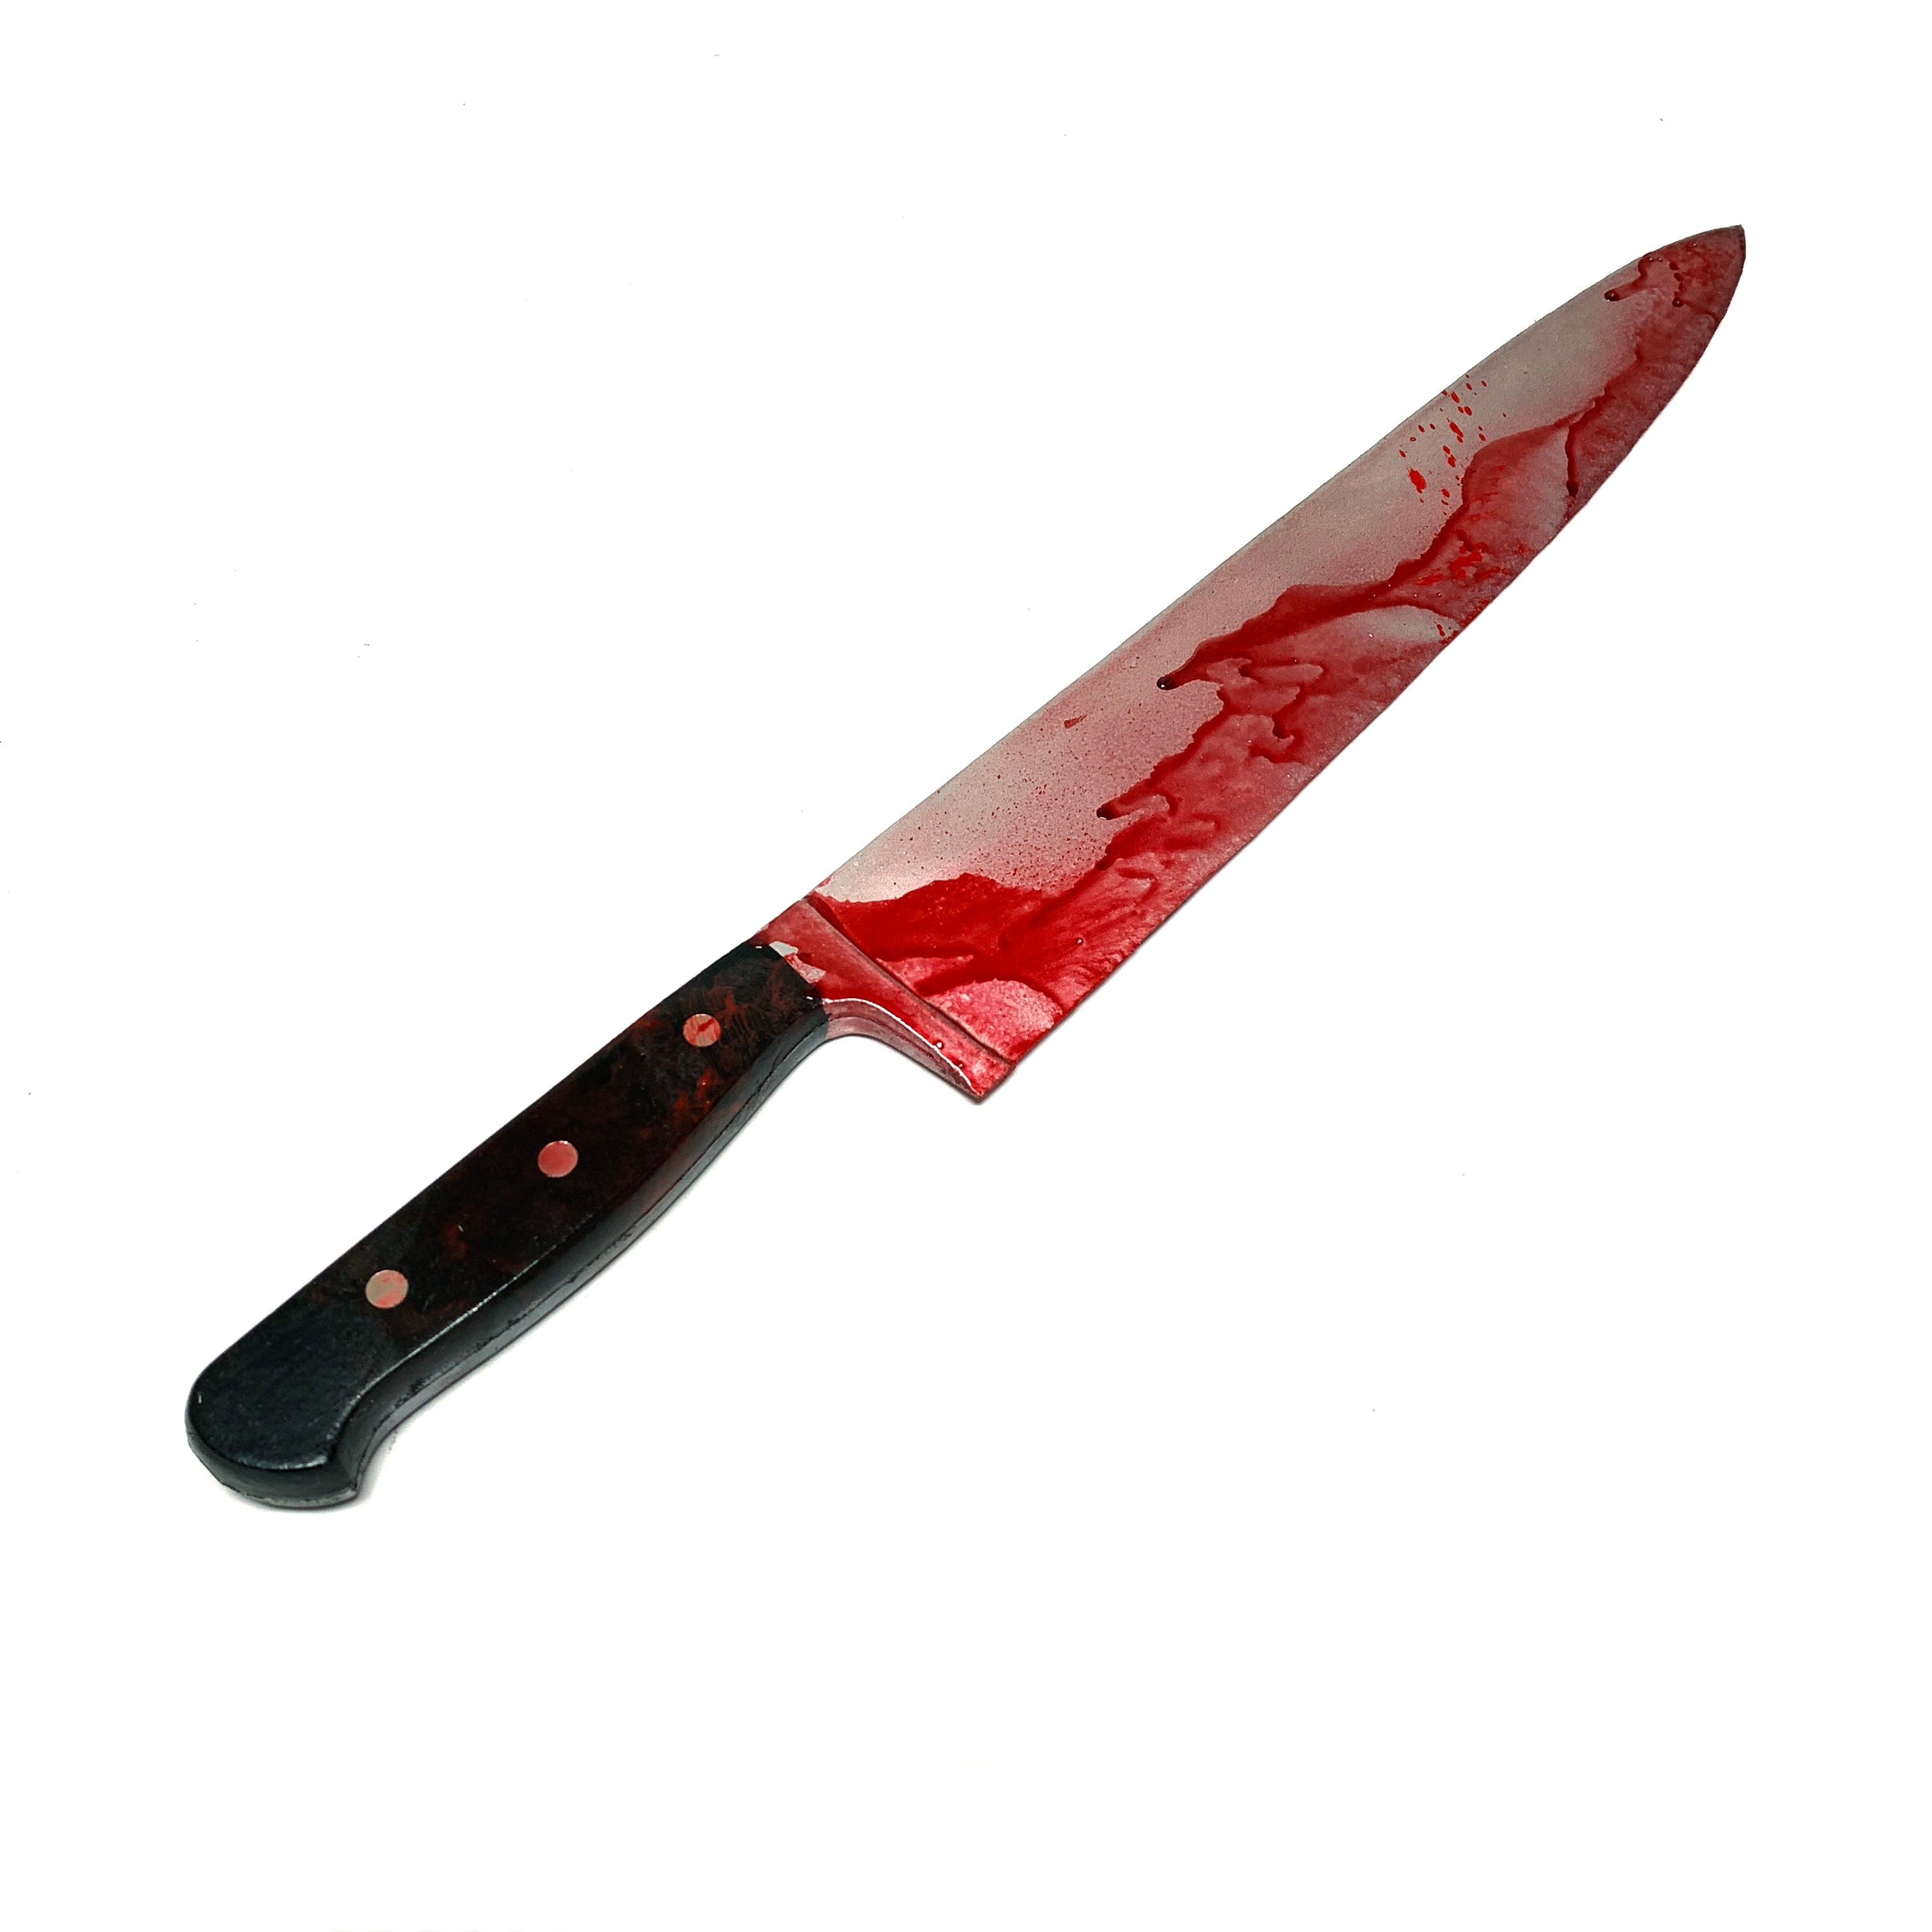 17 Inch Extra Large Kitchen Knife Foam Rubber Stunt Prop- Black Handle Bloody - Bloody